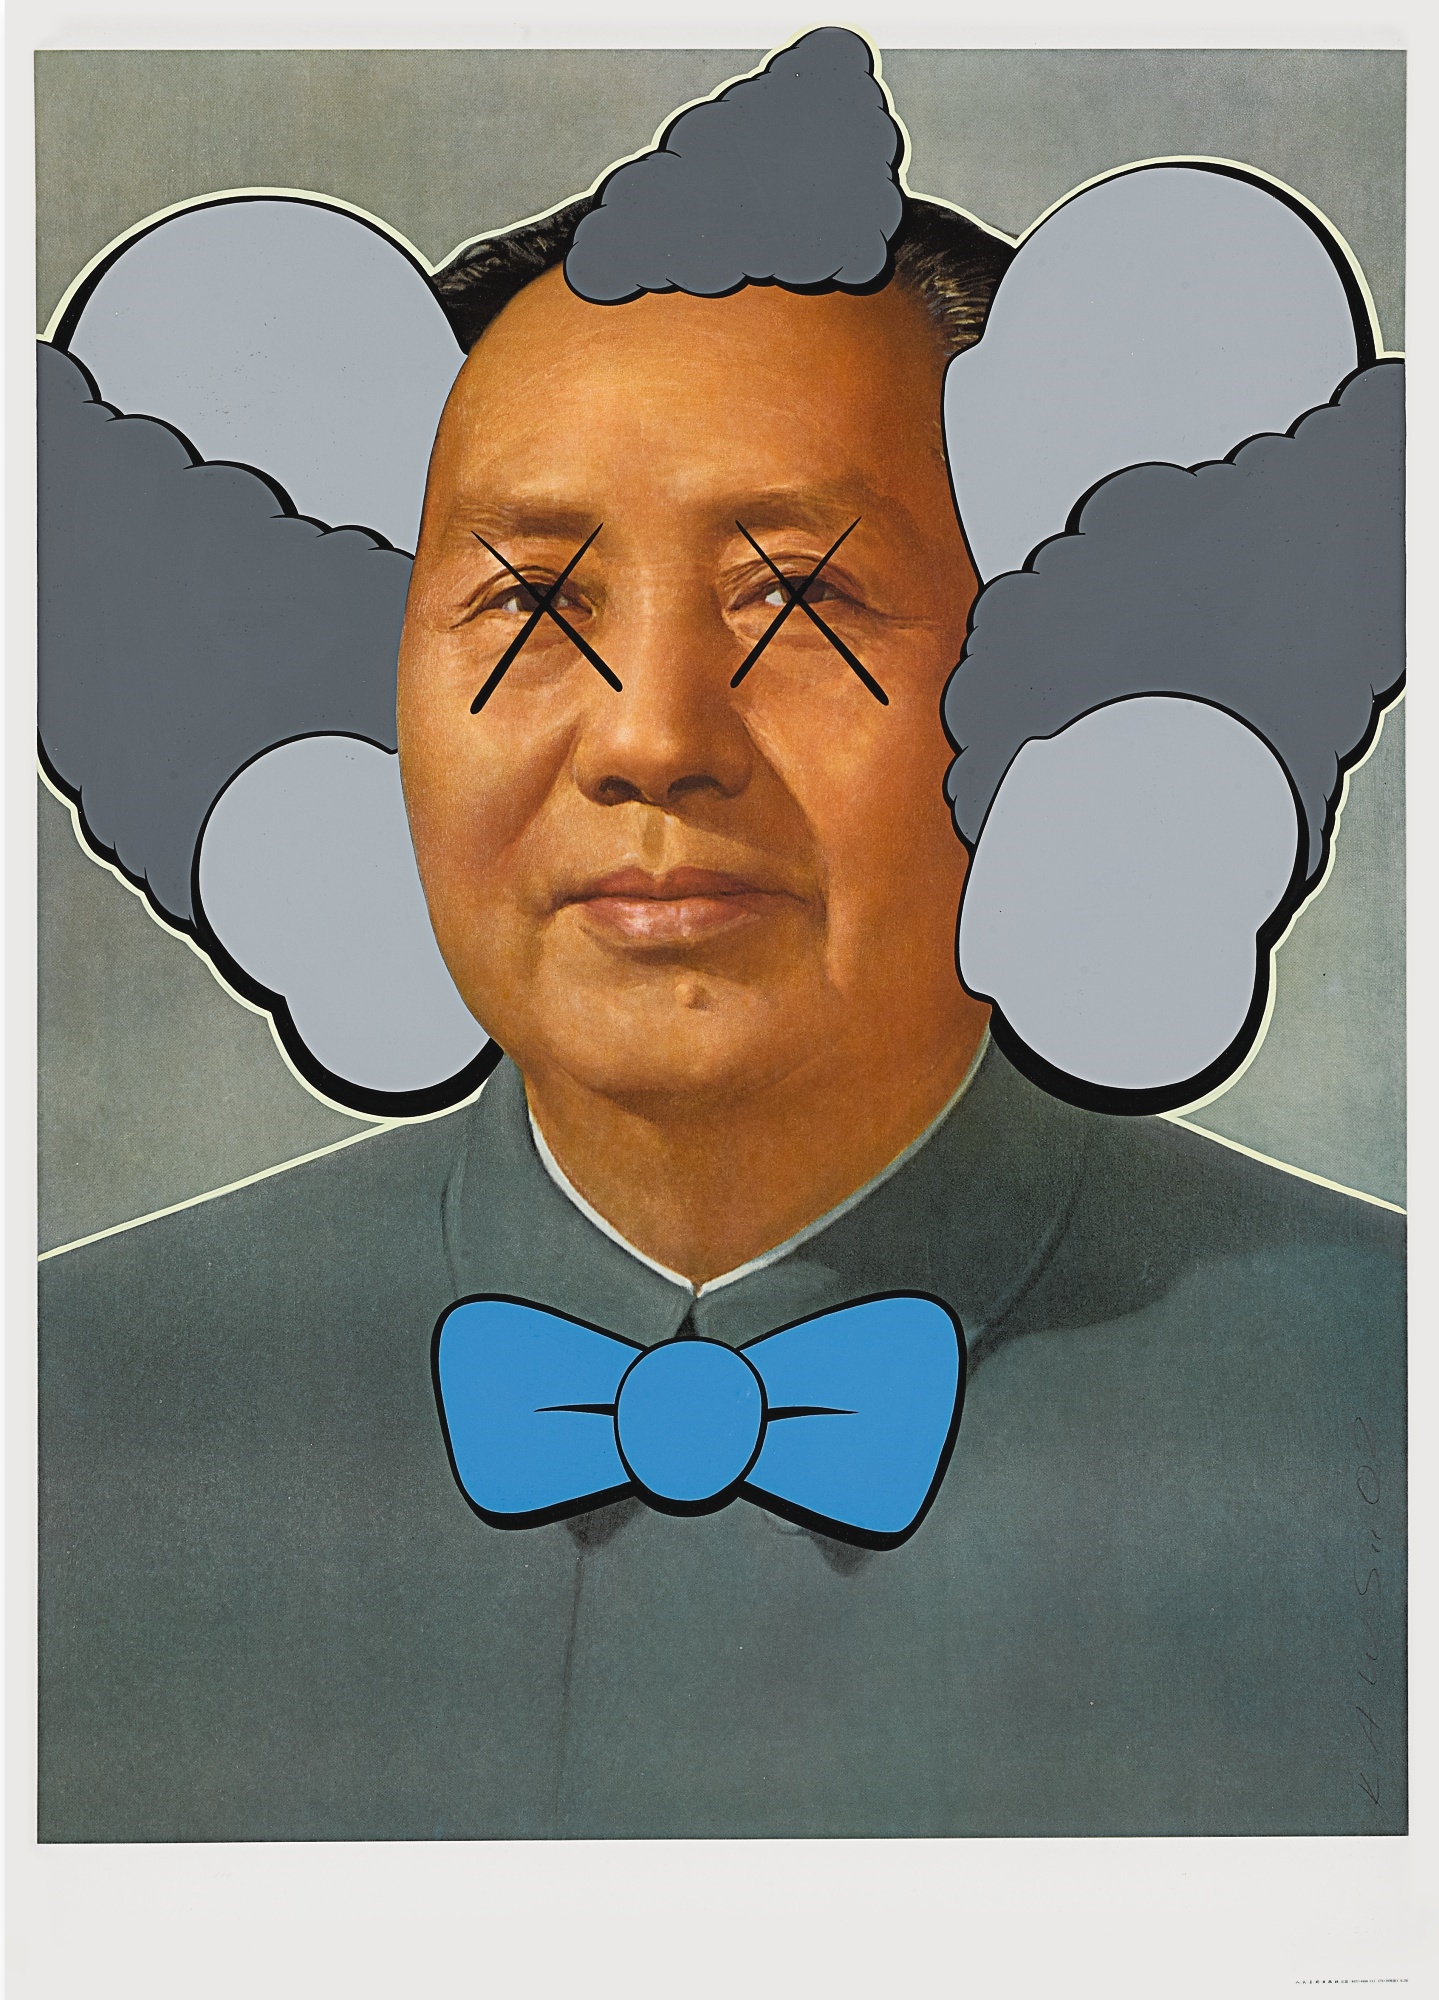 Artwork by KAWS, UNTITLED, Made of acrylic on poster mounted on linen